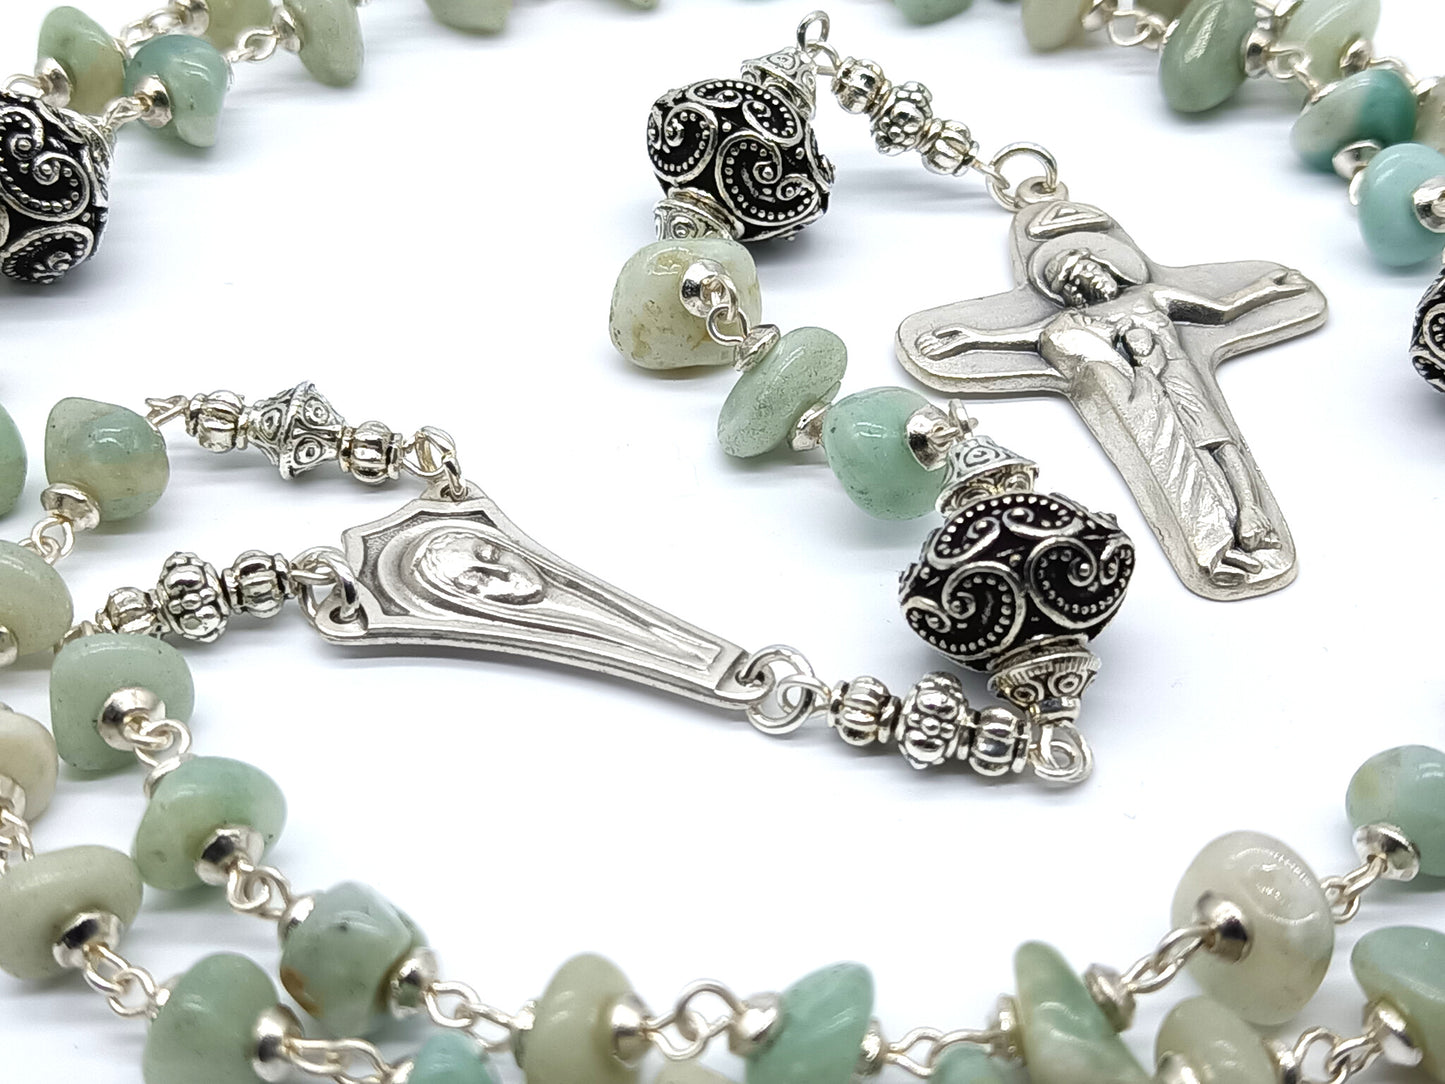 Virgin Mary unique rosary beads with amazonite gemstone beads, silver pater beads, crucifix and centre medal.